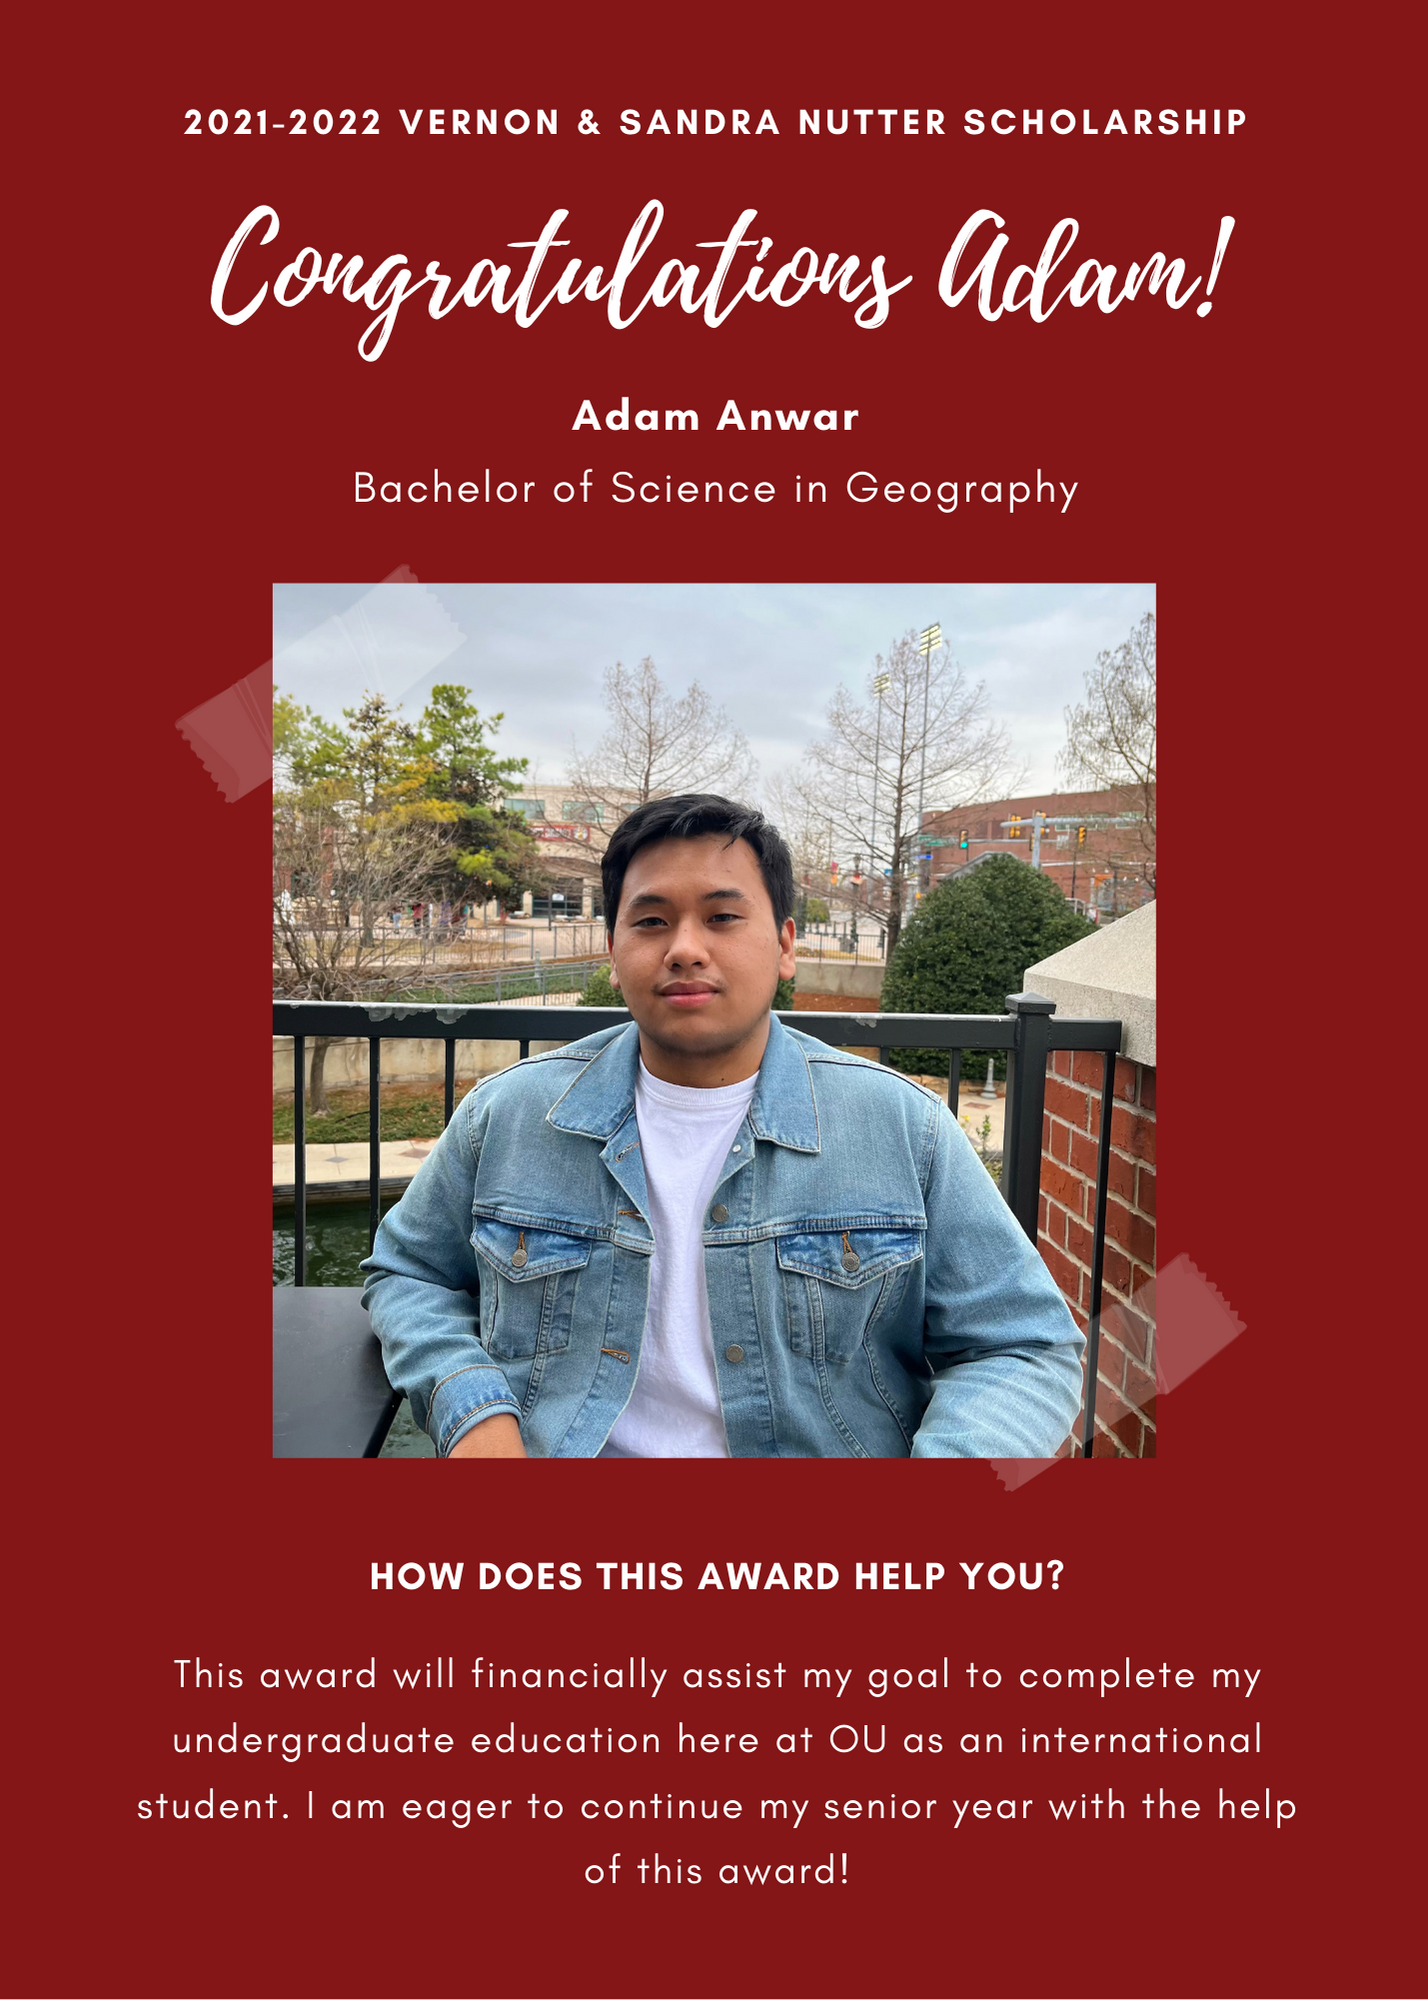 2021 -2022 A&GS Vernon & Sandra Nutter Scholarship. Congratulations Adam! Adam Anwar Bachelor of Science in Geography. How does this award help you?  This award will financially assist my gial to complete me undergraduate education here at OU as an international student. I am eager to continue my senior year with the help of this award!